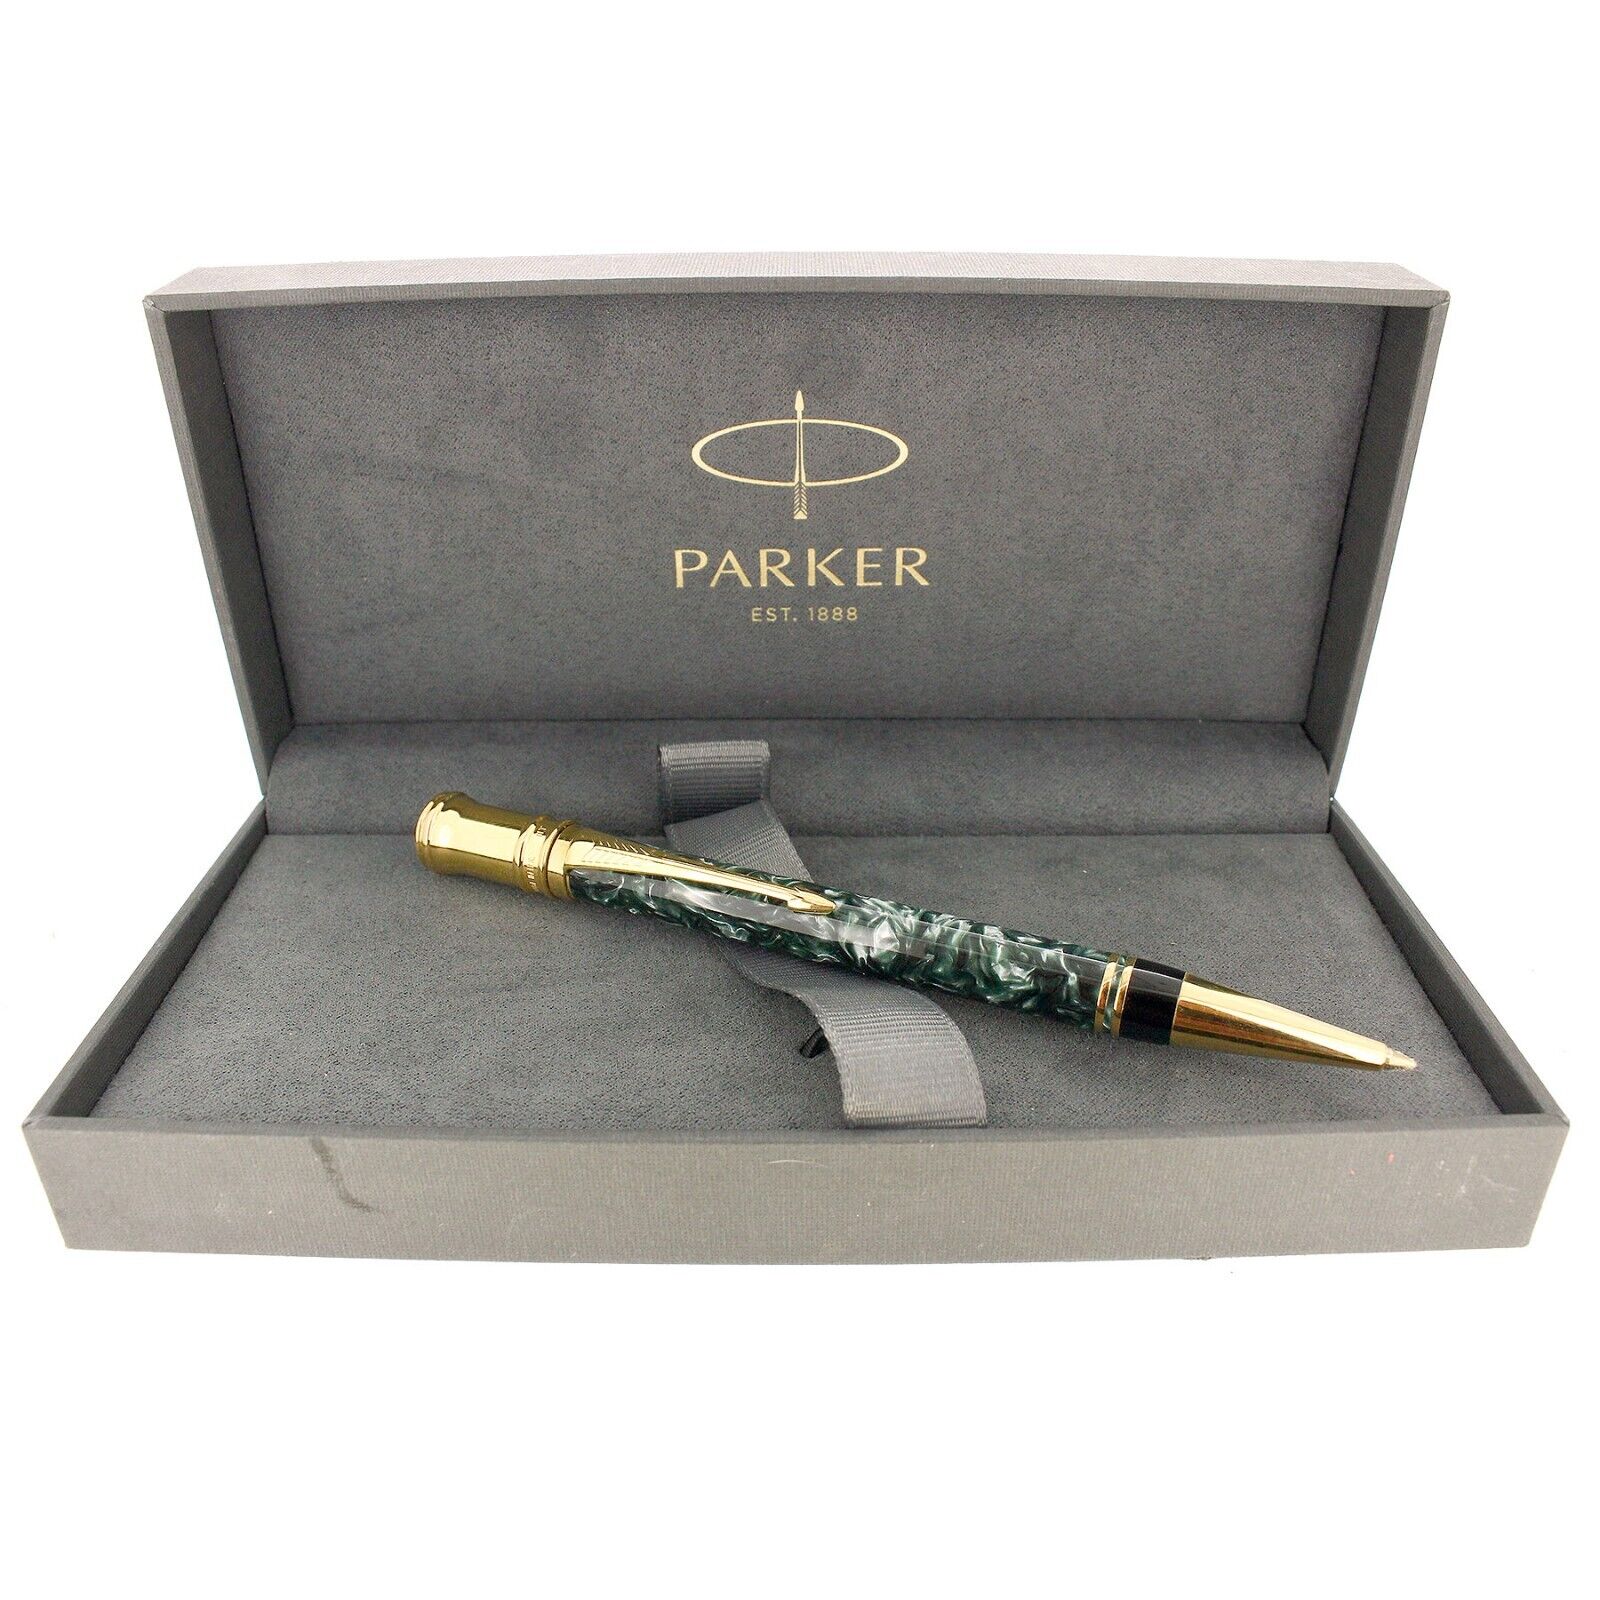 1995 PARKER DUOFOLD EMERALD MARBLED BALLPOINT PEN MINT IN BOX MADE IN UK